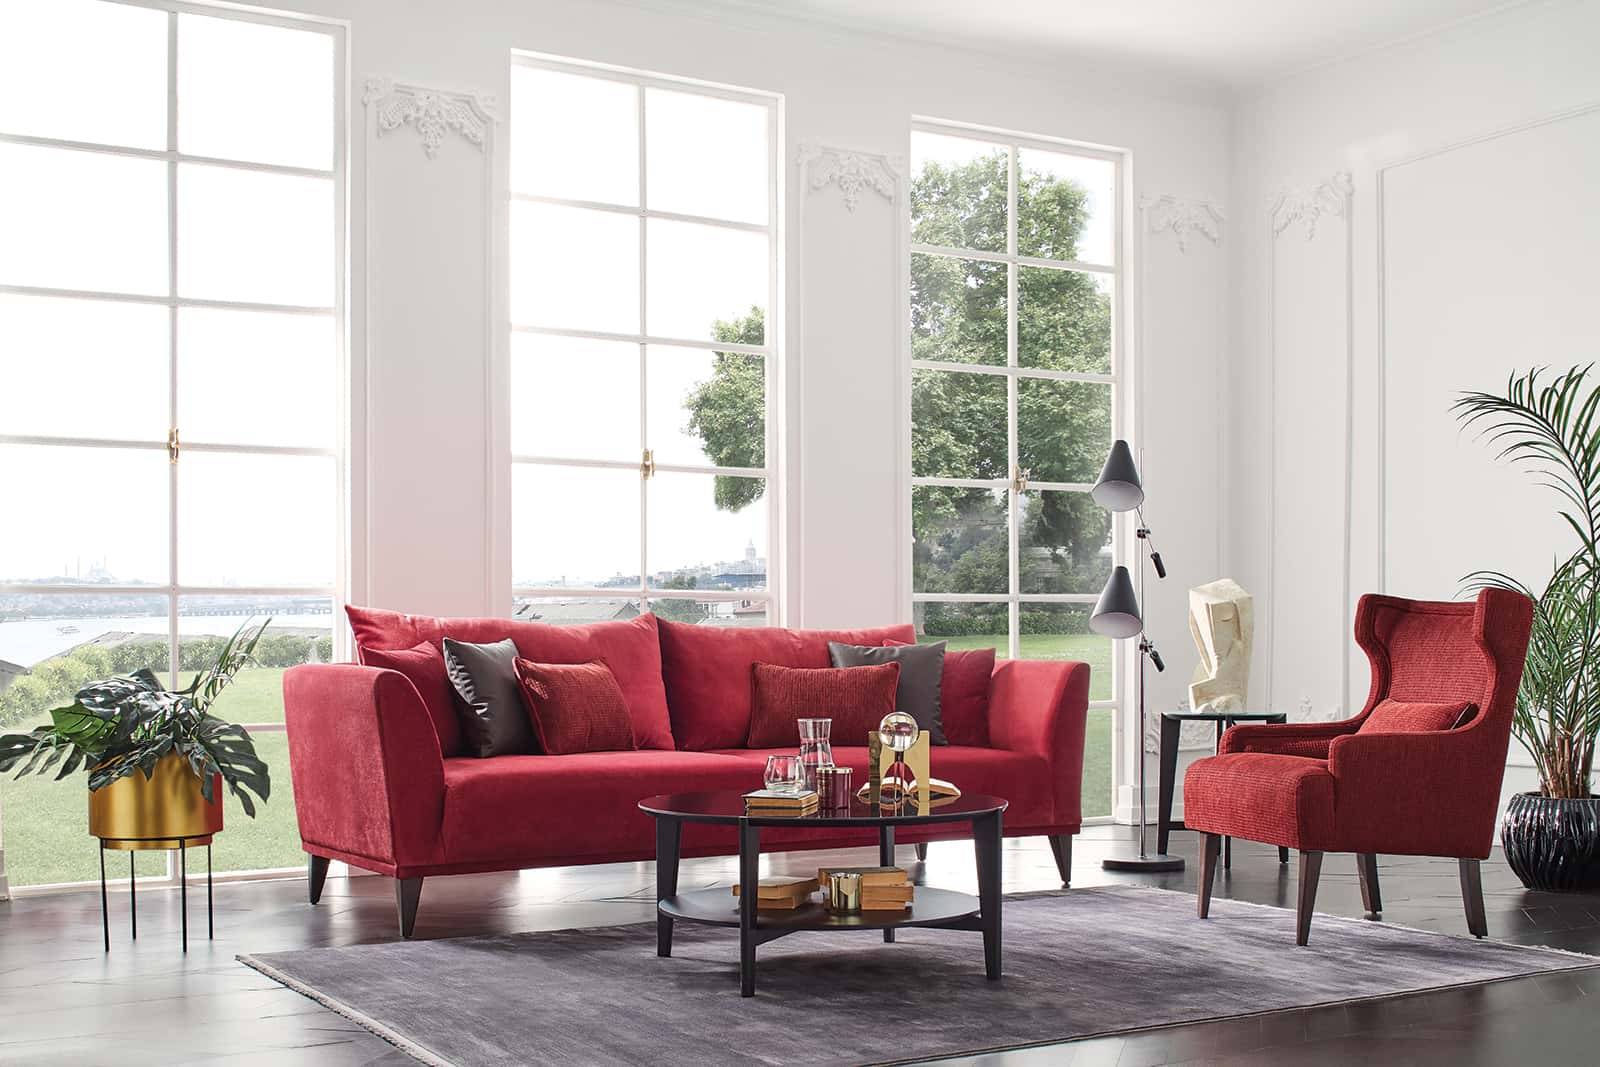 Gravity Plus 3 Seater Sofa Red by Enza Home